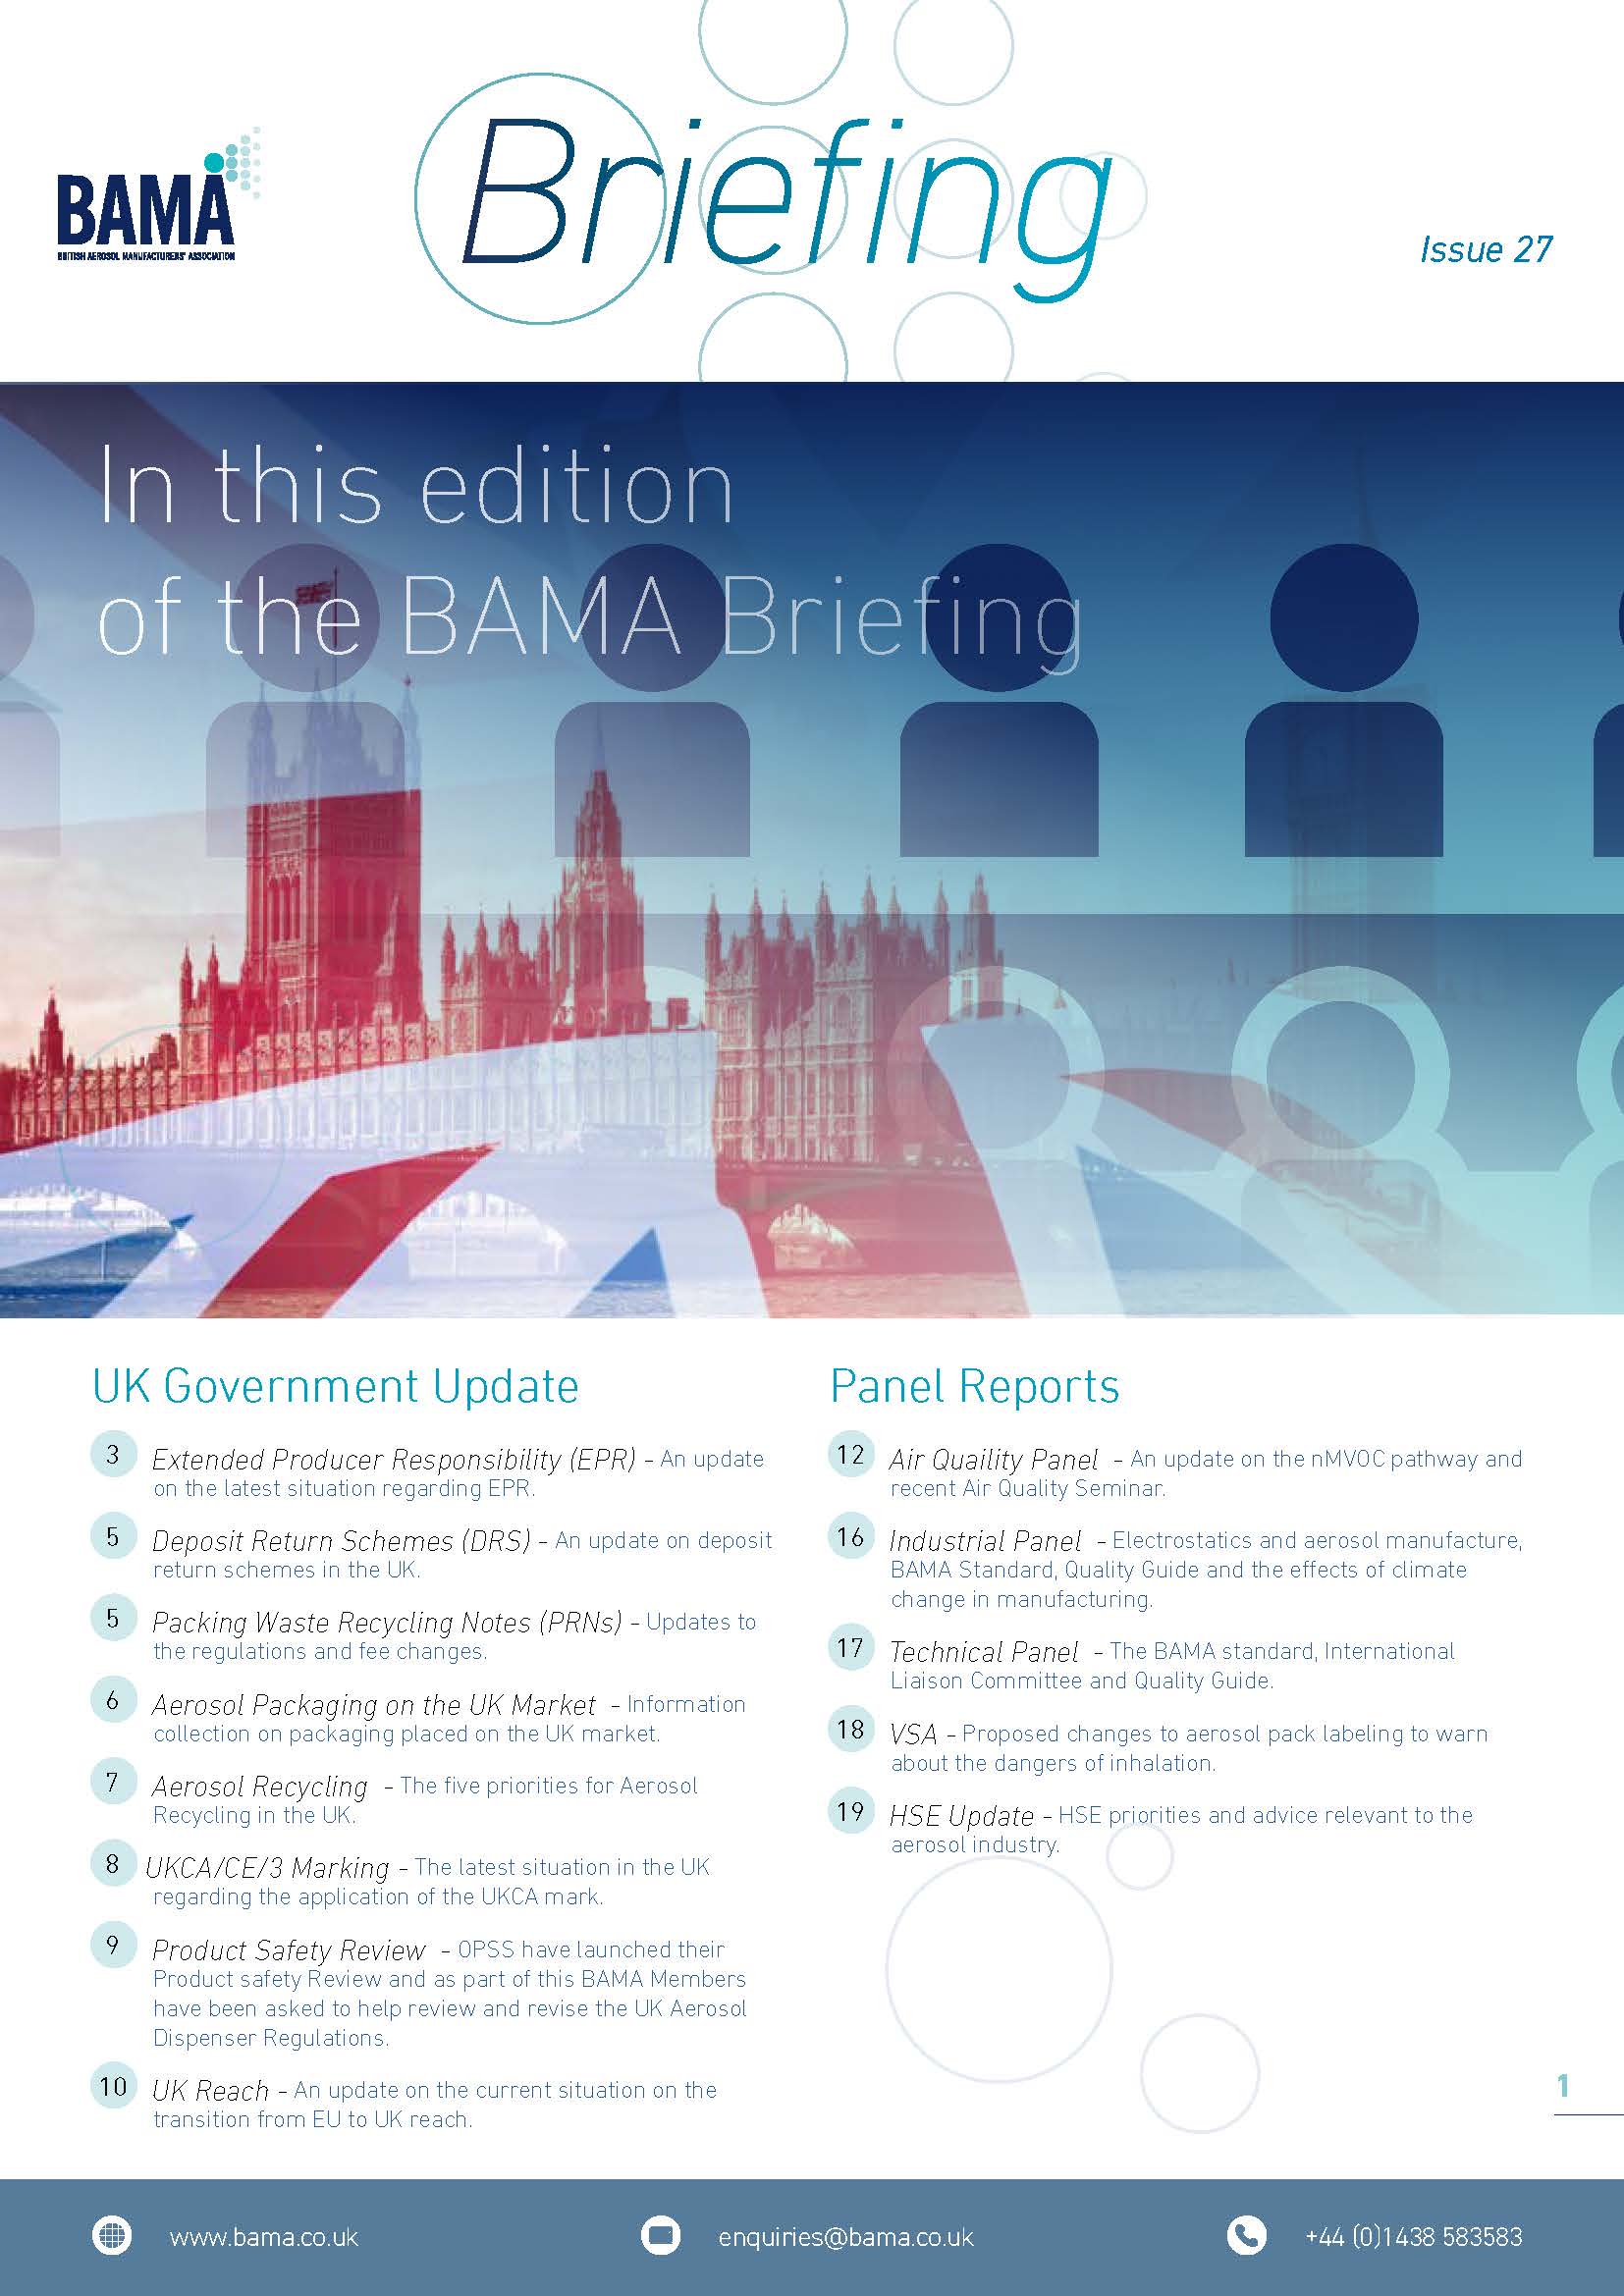 BAMA Briefing Issue 27